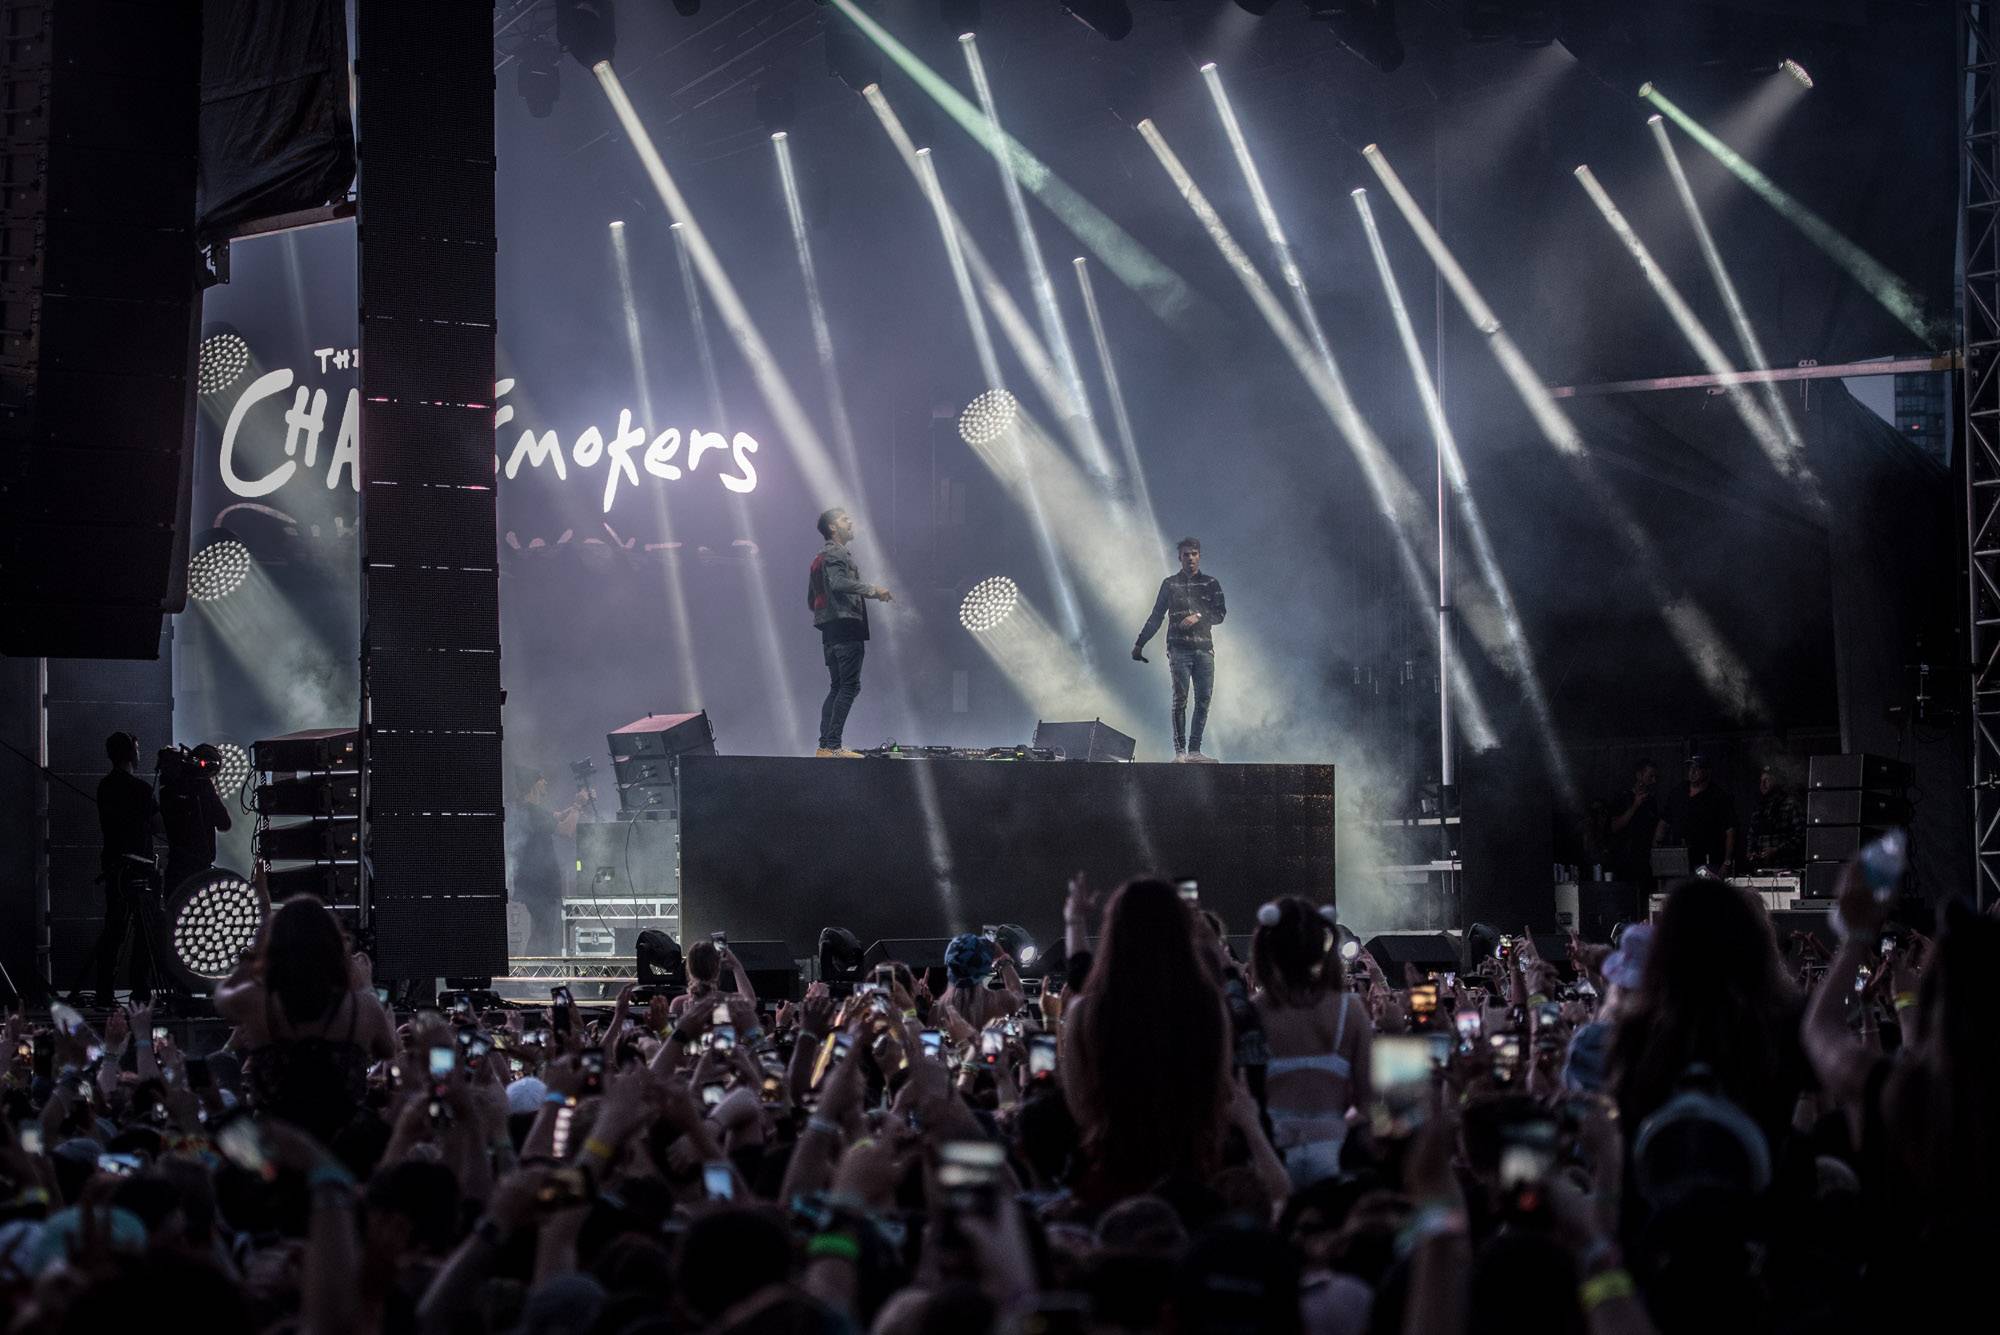 Chainsmokers at Fvded in the Park, Surrey, July 8 2017. Jason Martin photo.